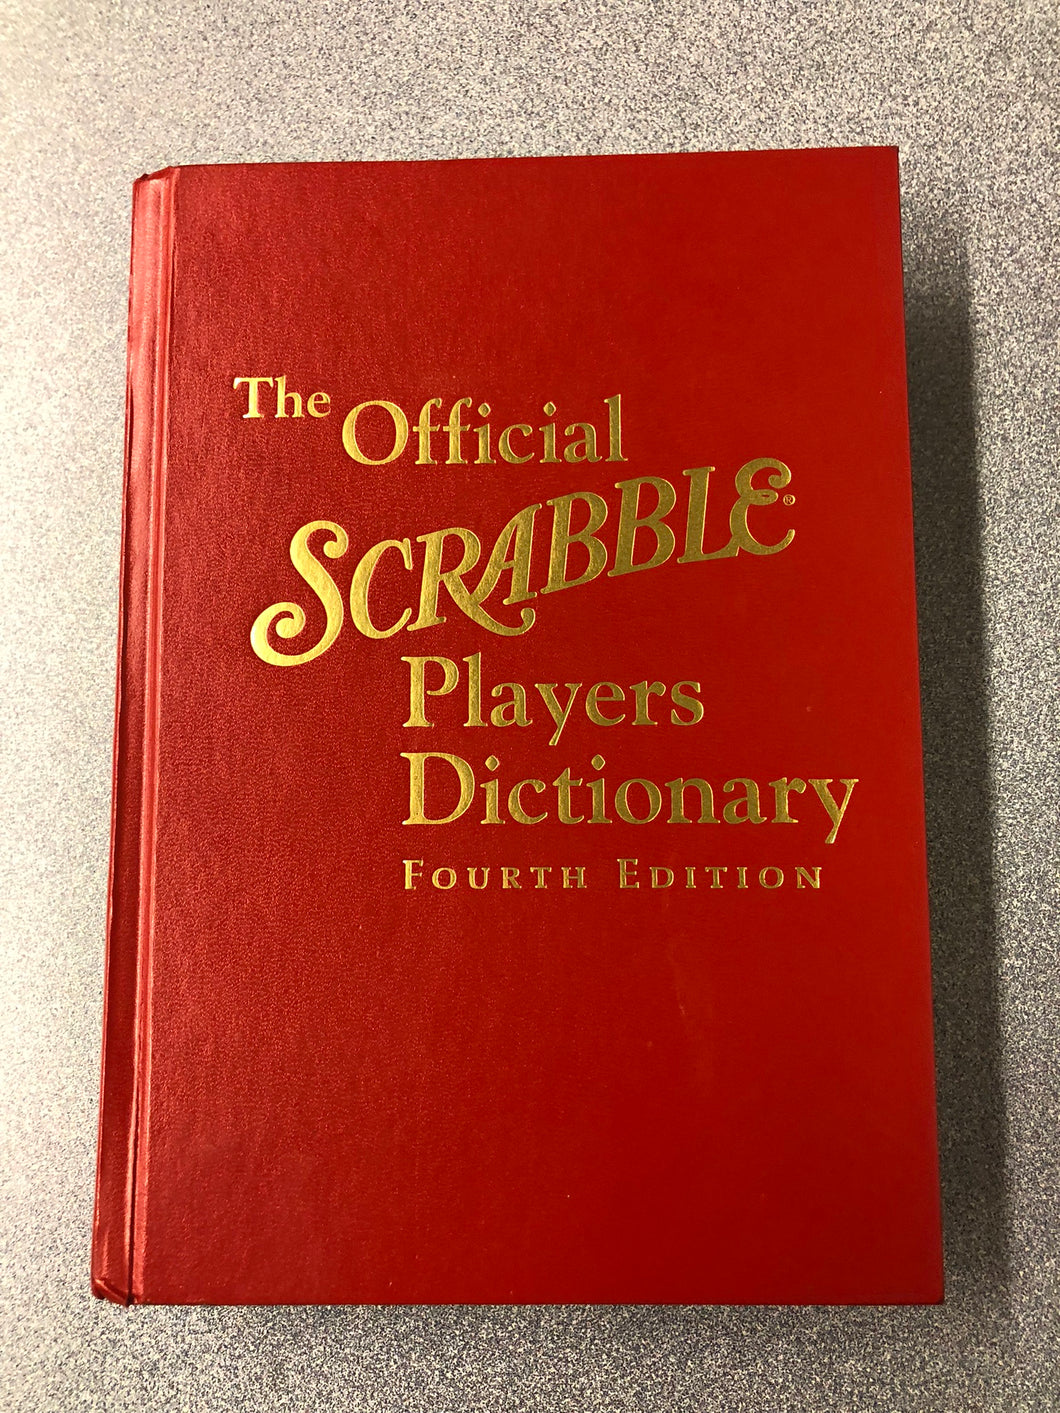 The Official Scrabble Players Dictionary, 4th Edition, [2004] CG 7/22